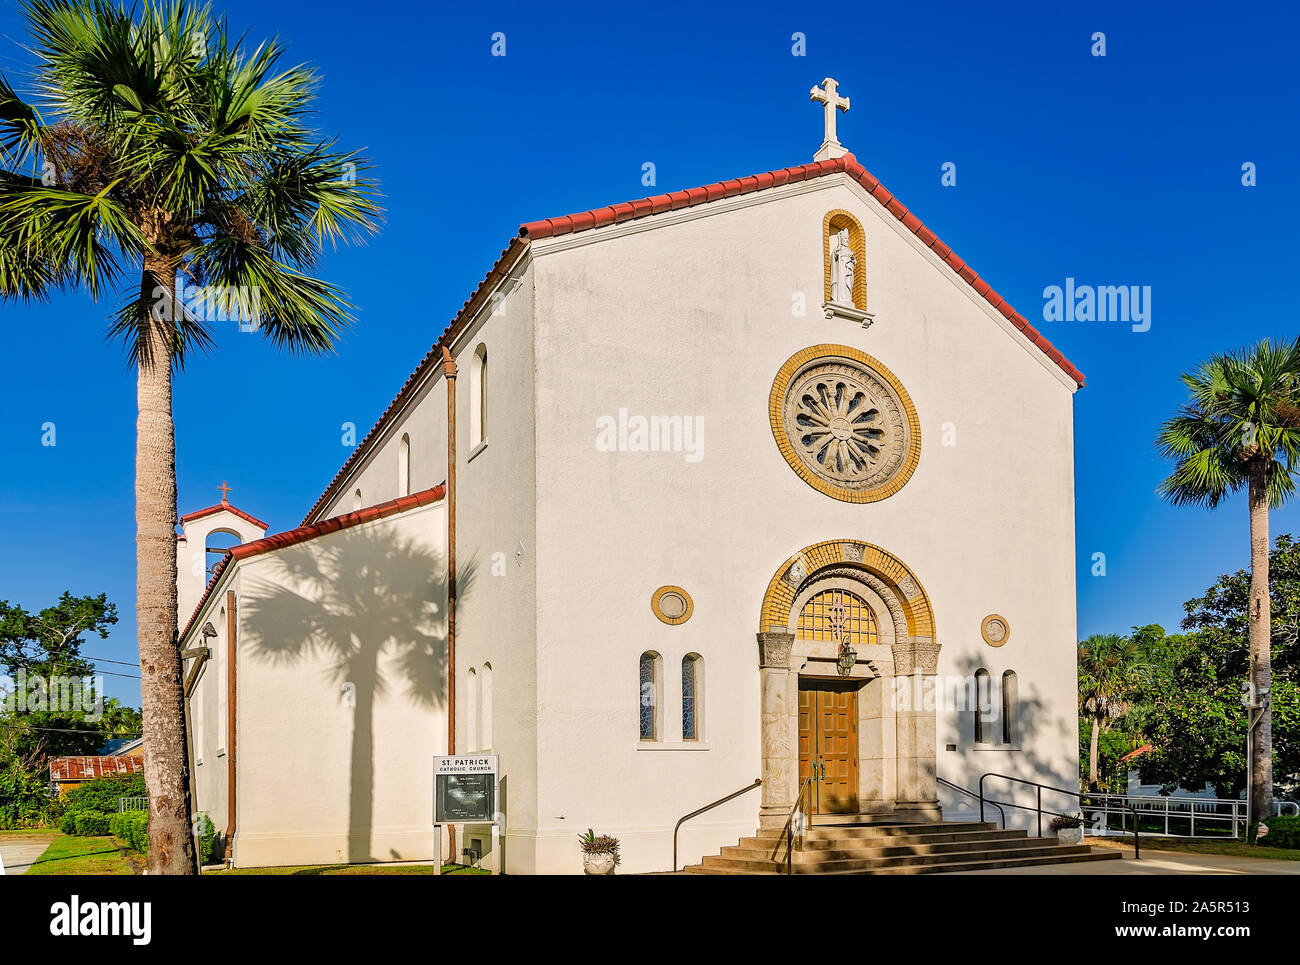 St. Patrick Catholic Church is pictured on a sunny day, Oct. 6, 2019, in Apalachicola, Florida. Stock Photo